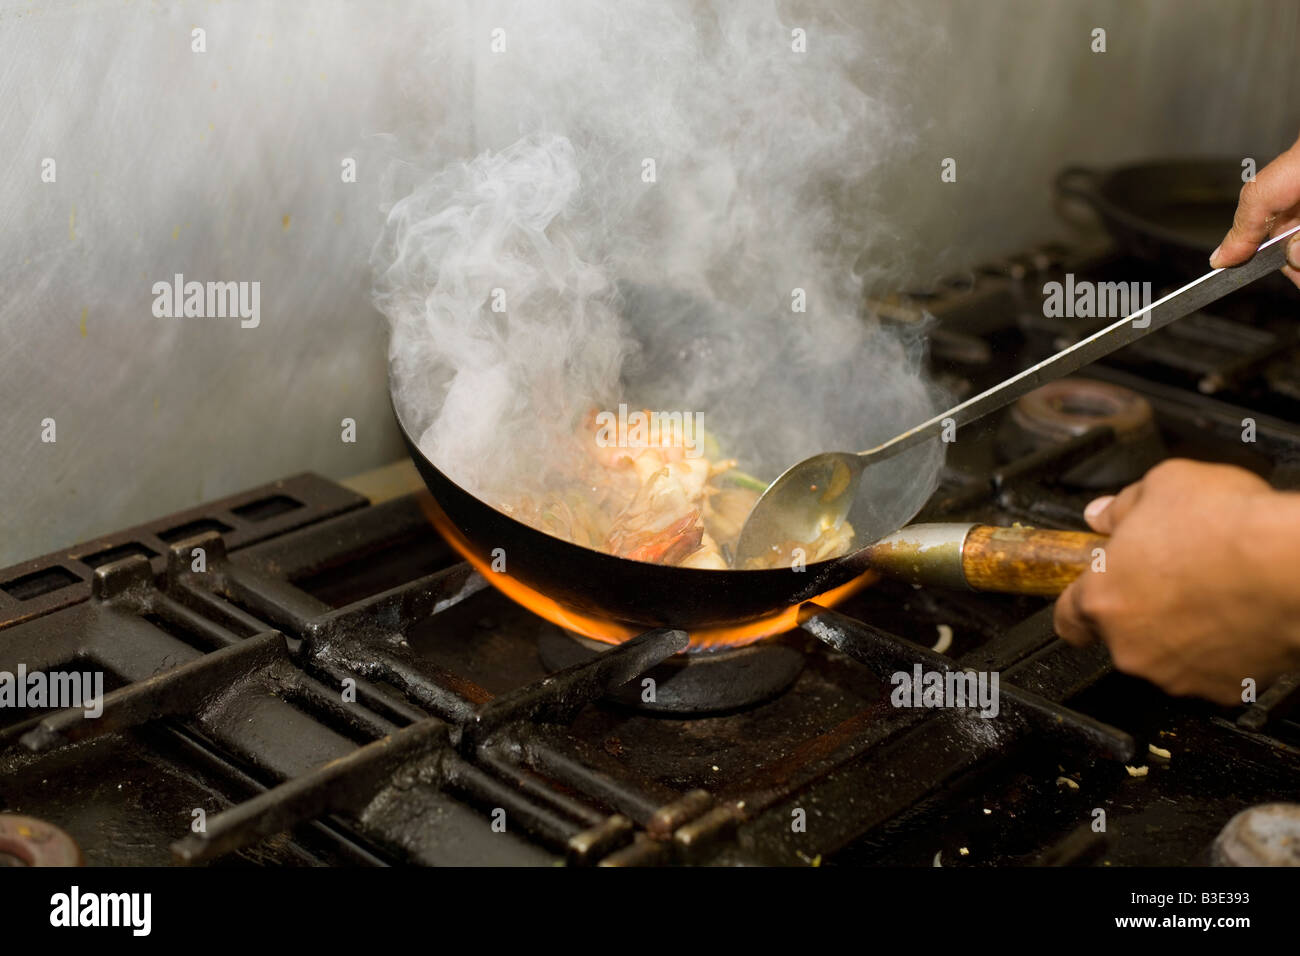 A chef pan frys pawns in an Indian restaurant Stock Photo